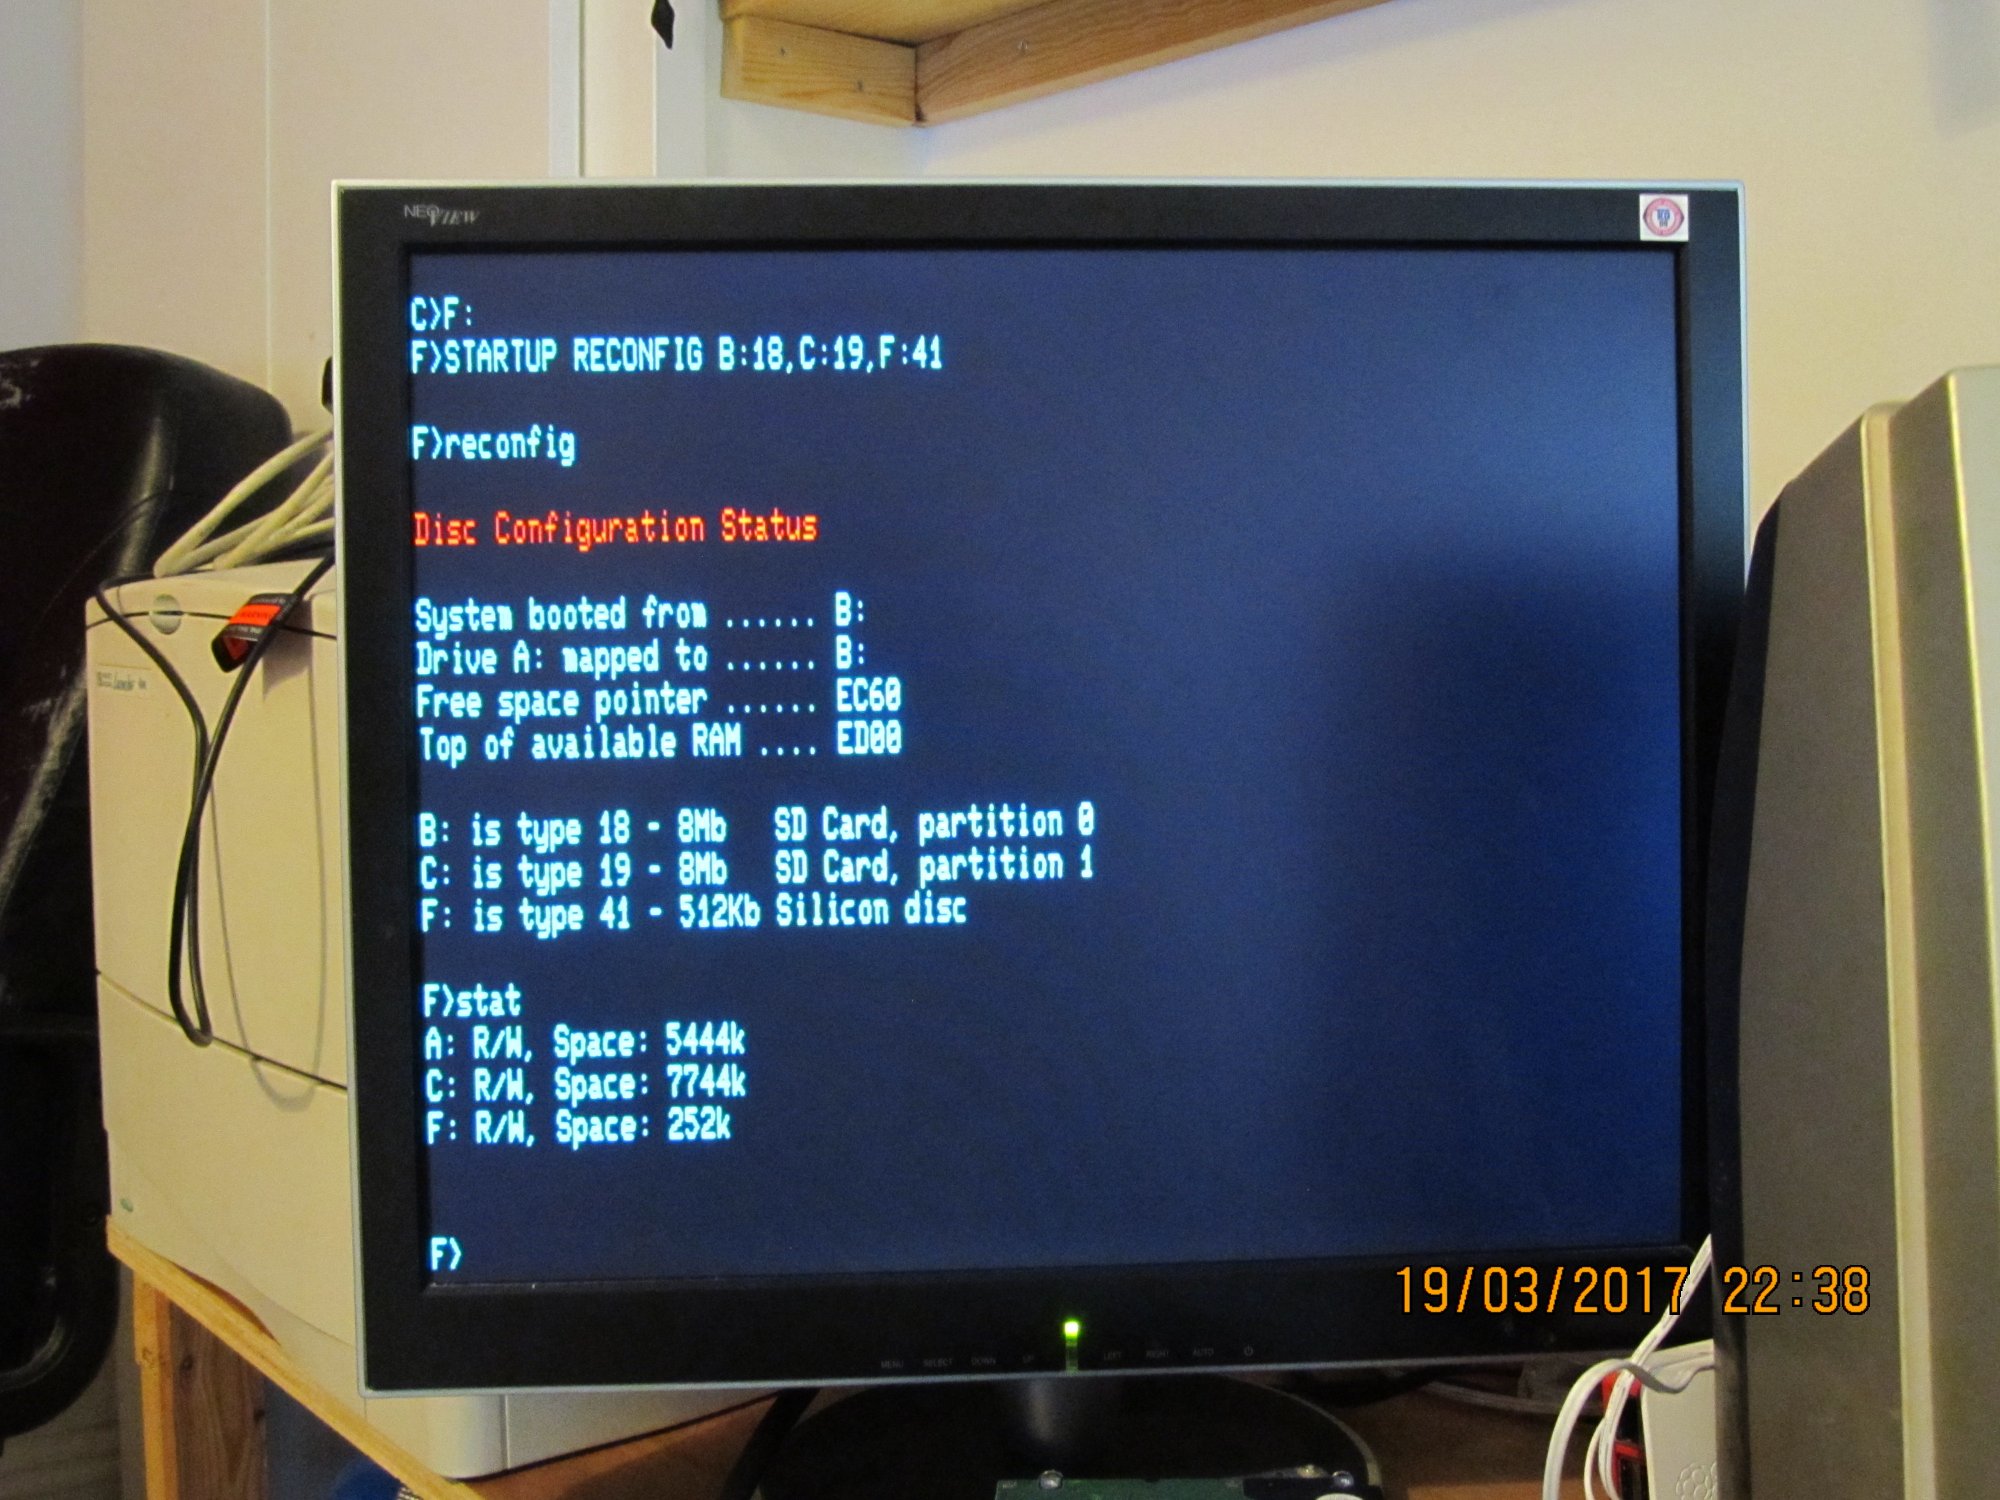 Output from the VGA port